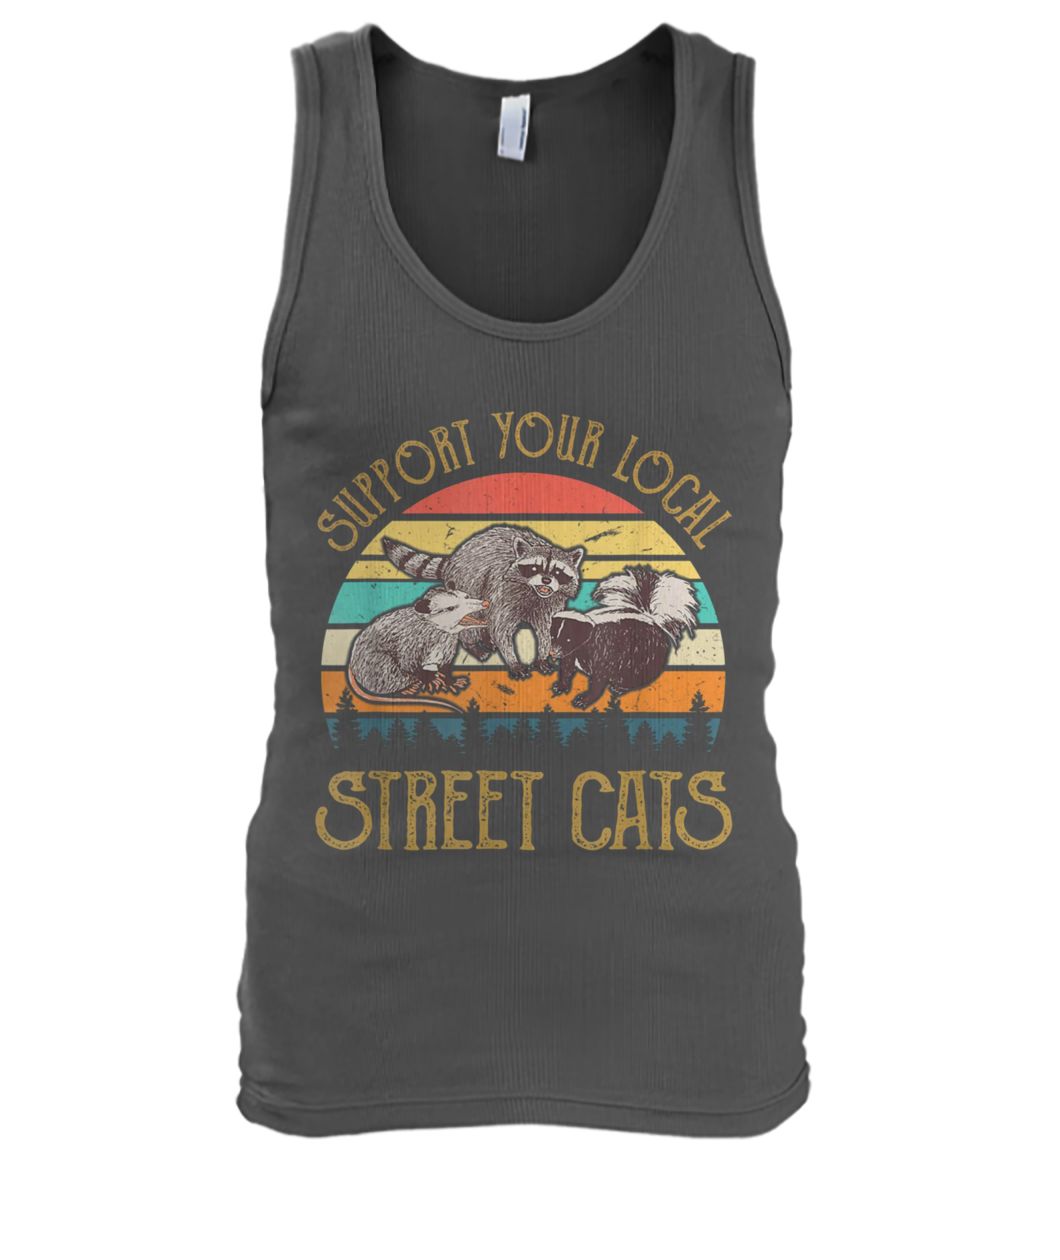 Vintage support your local street cats men's tank top